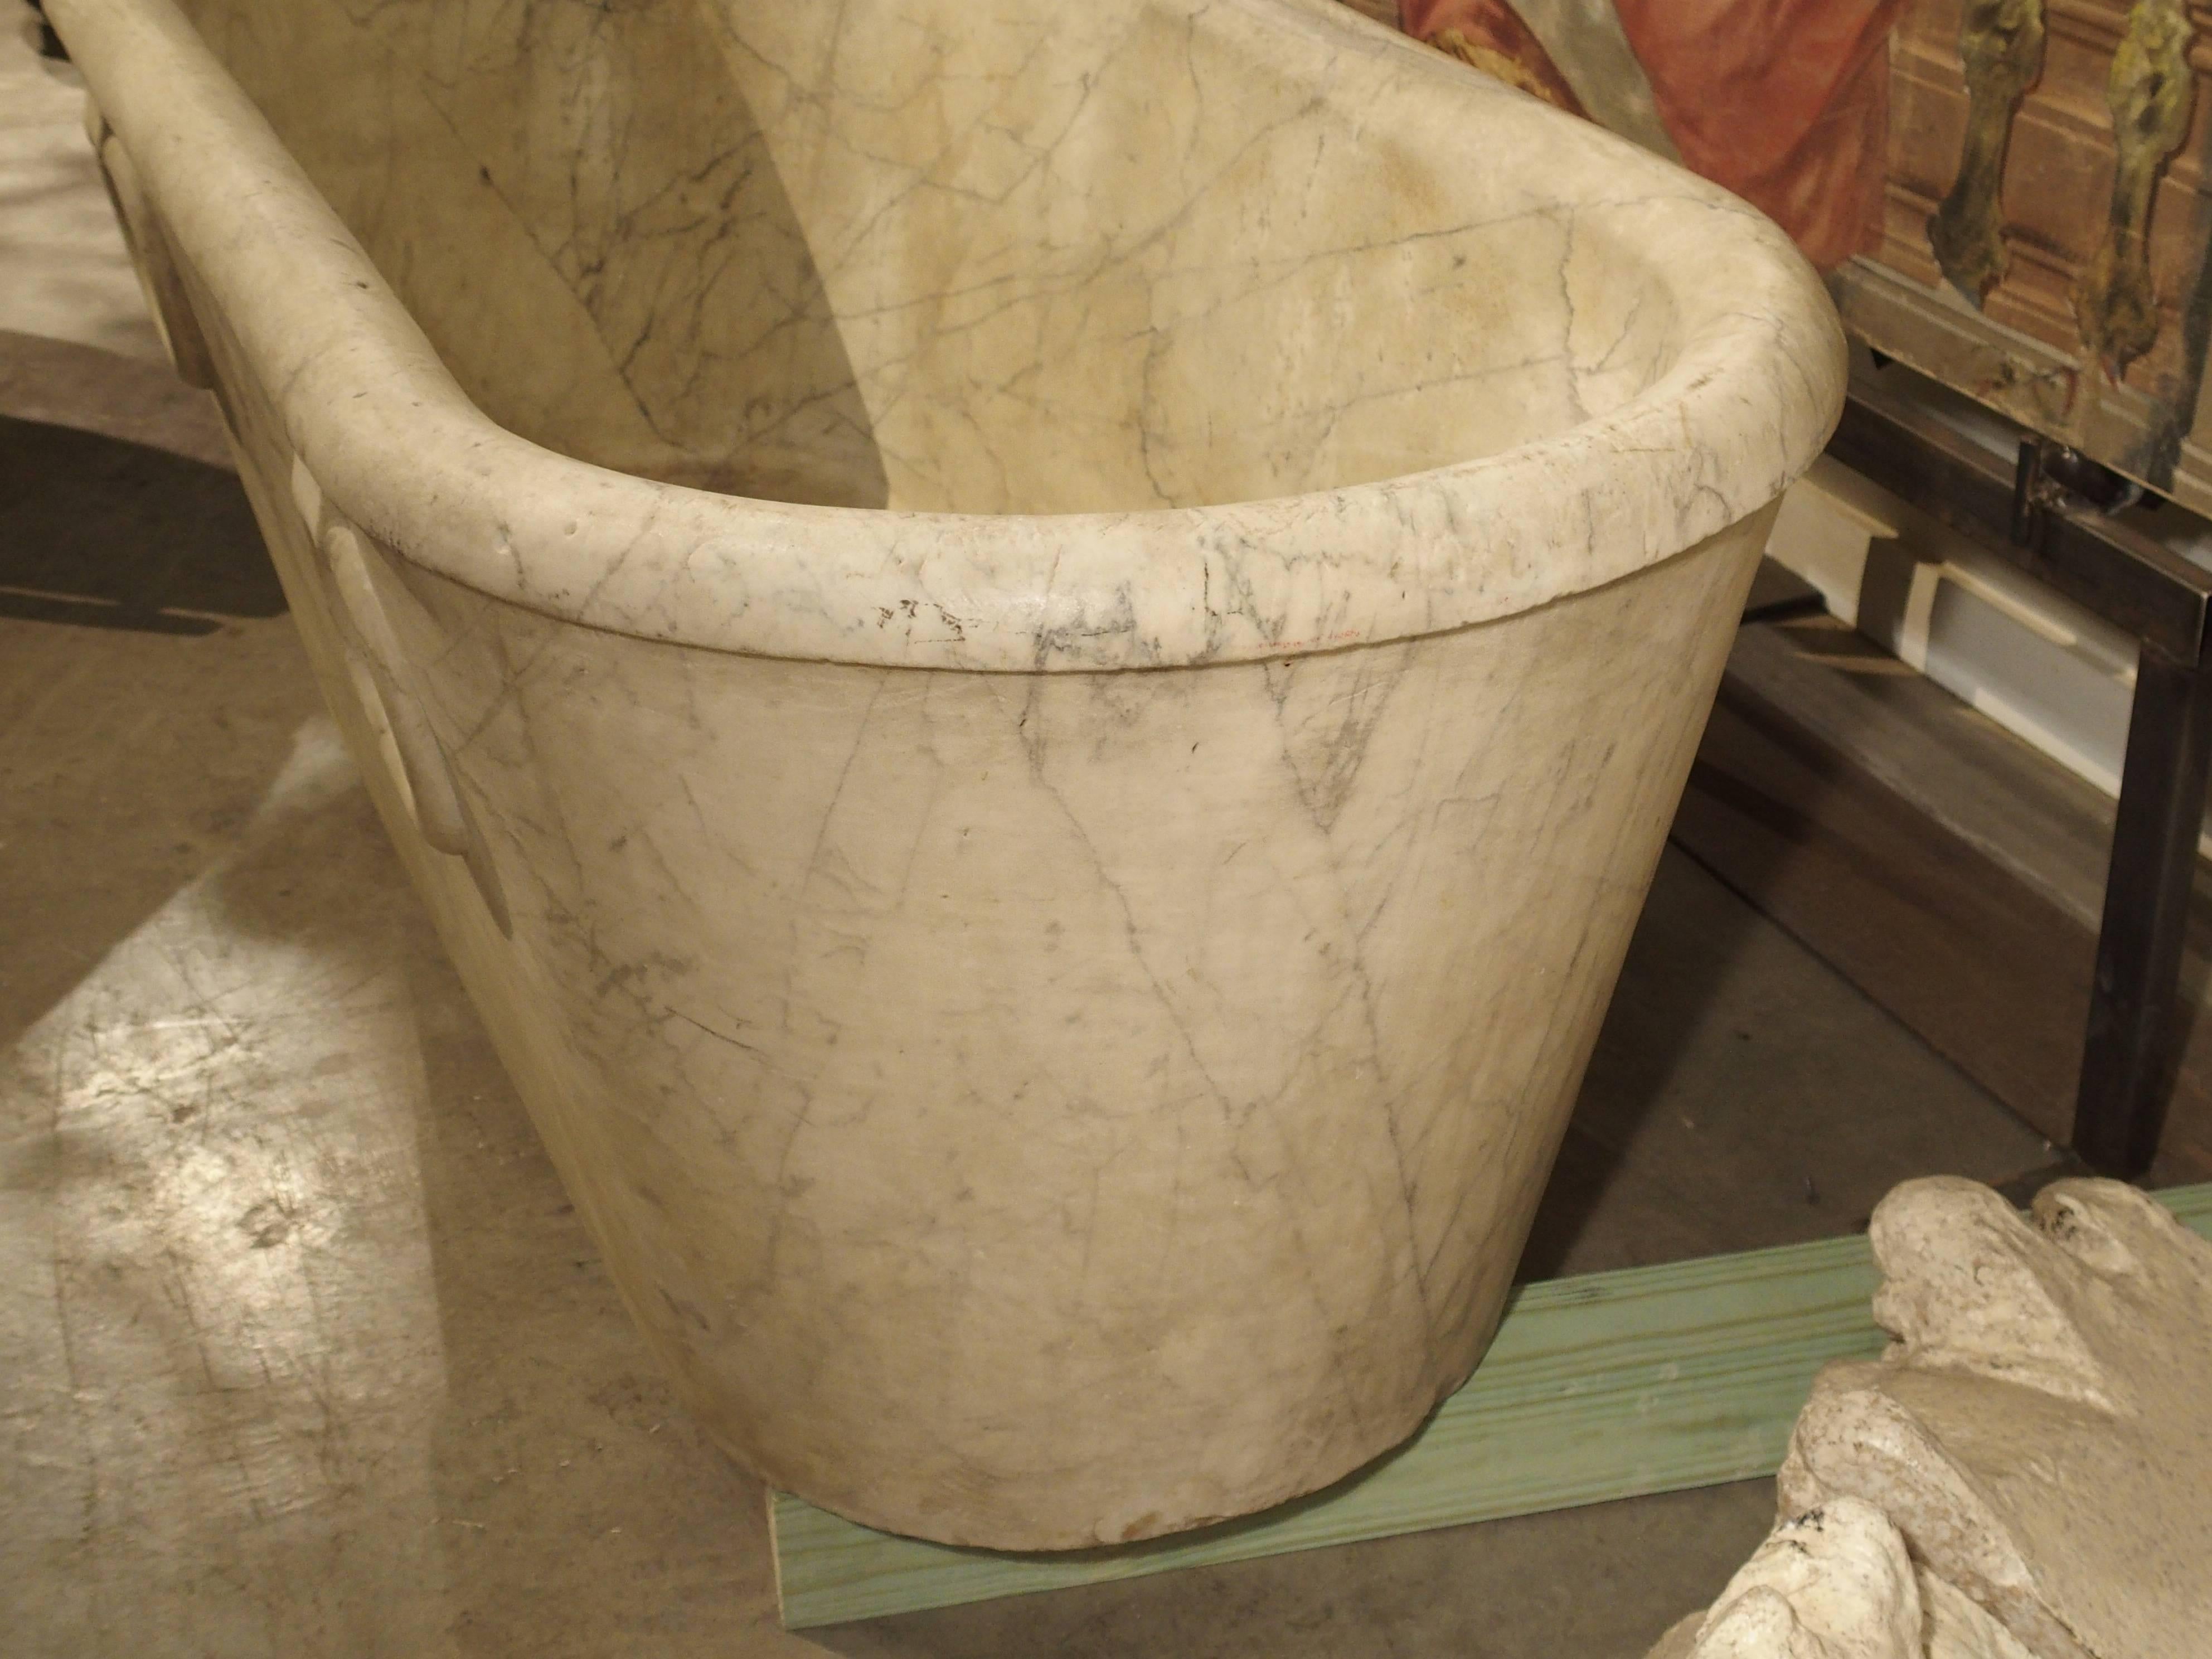 This stunning carrara marble bathtub was recently pulled from an estate in Genoa, Italy, and dates to the beginning of the 19th century. It has been carved from one solid piece of marble, and unlike other marble tubs of similar style, there is a